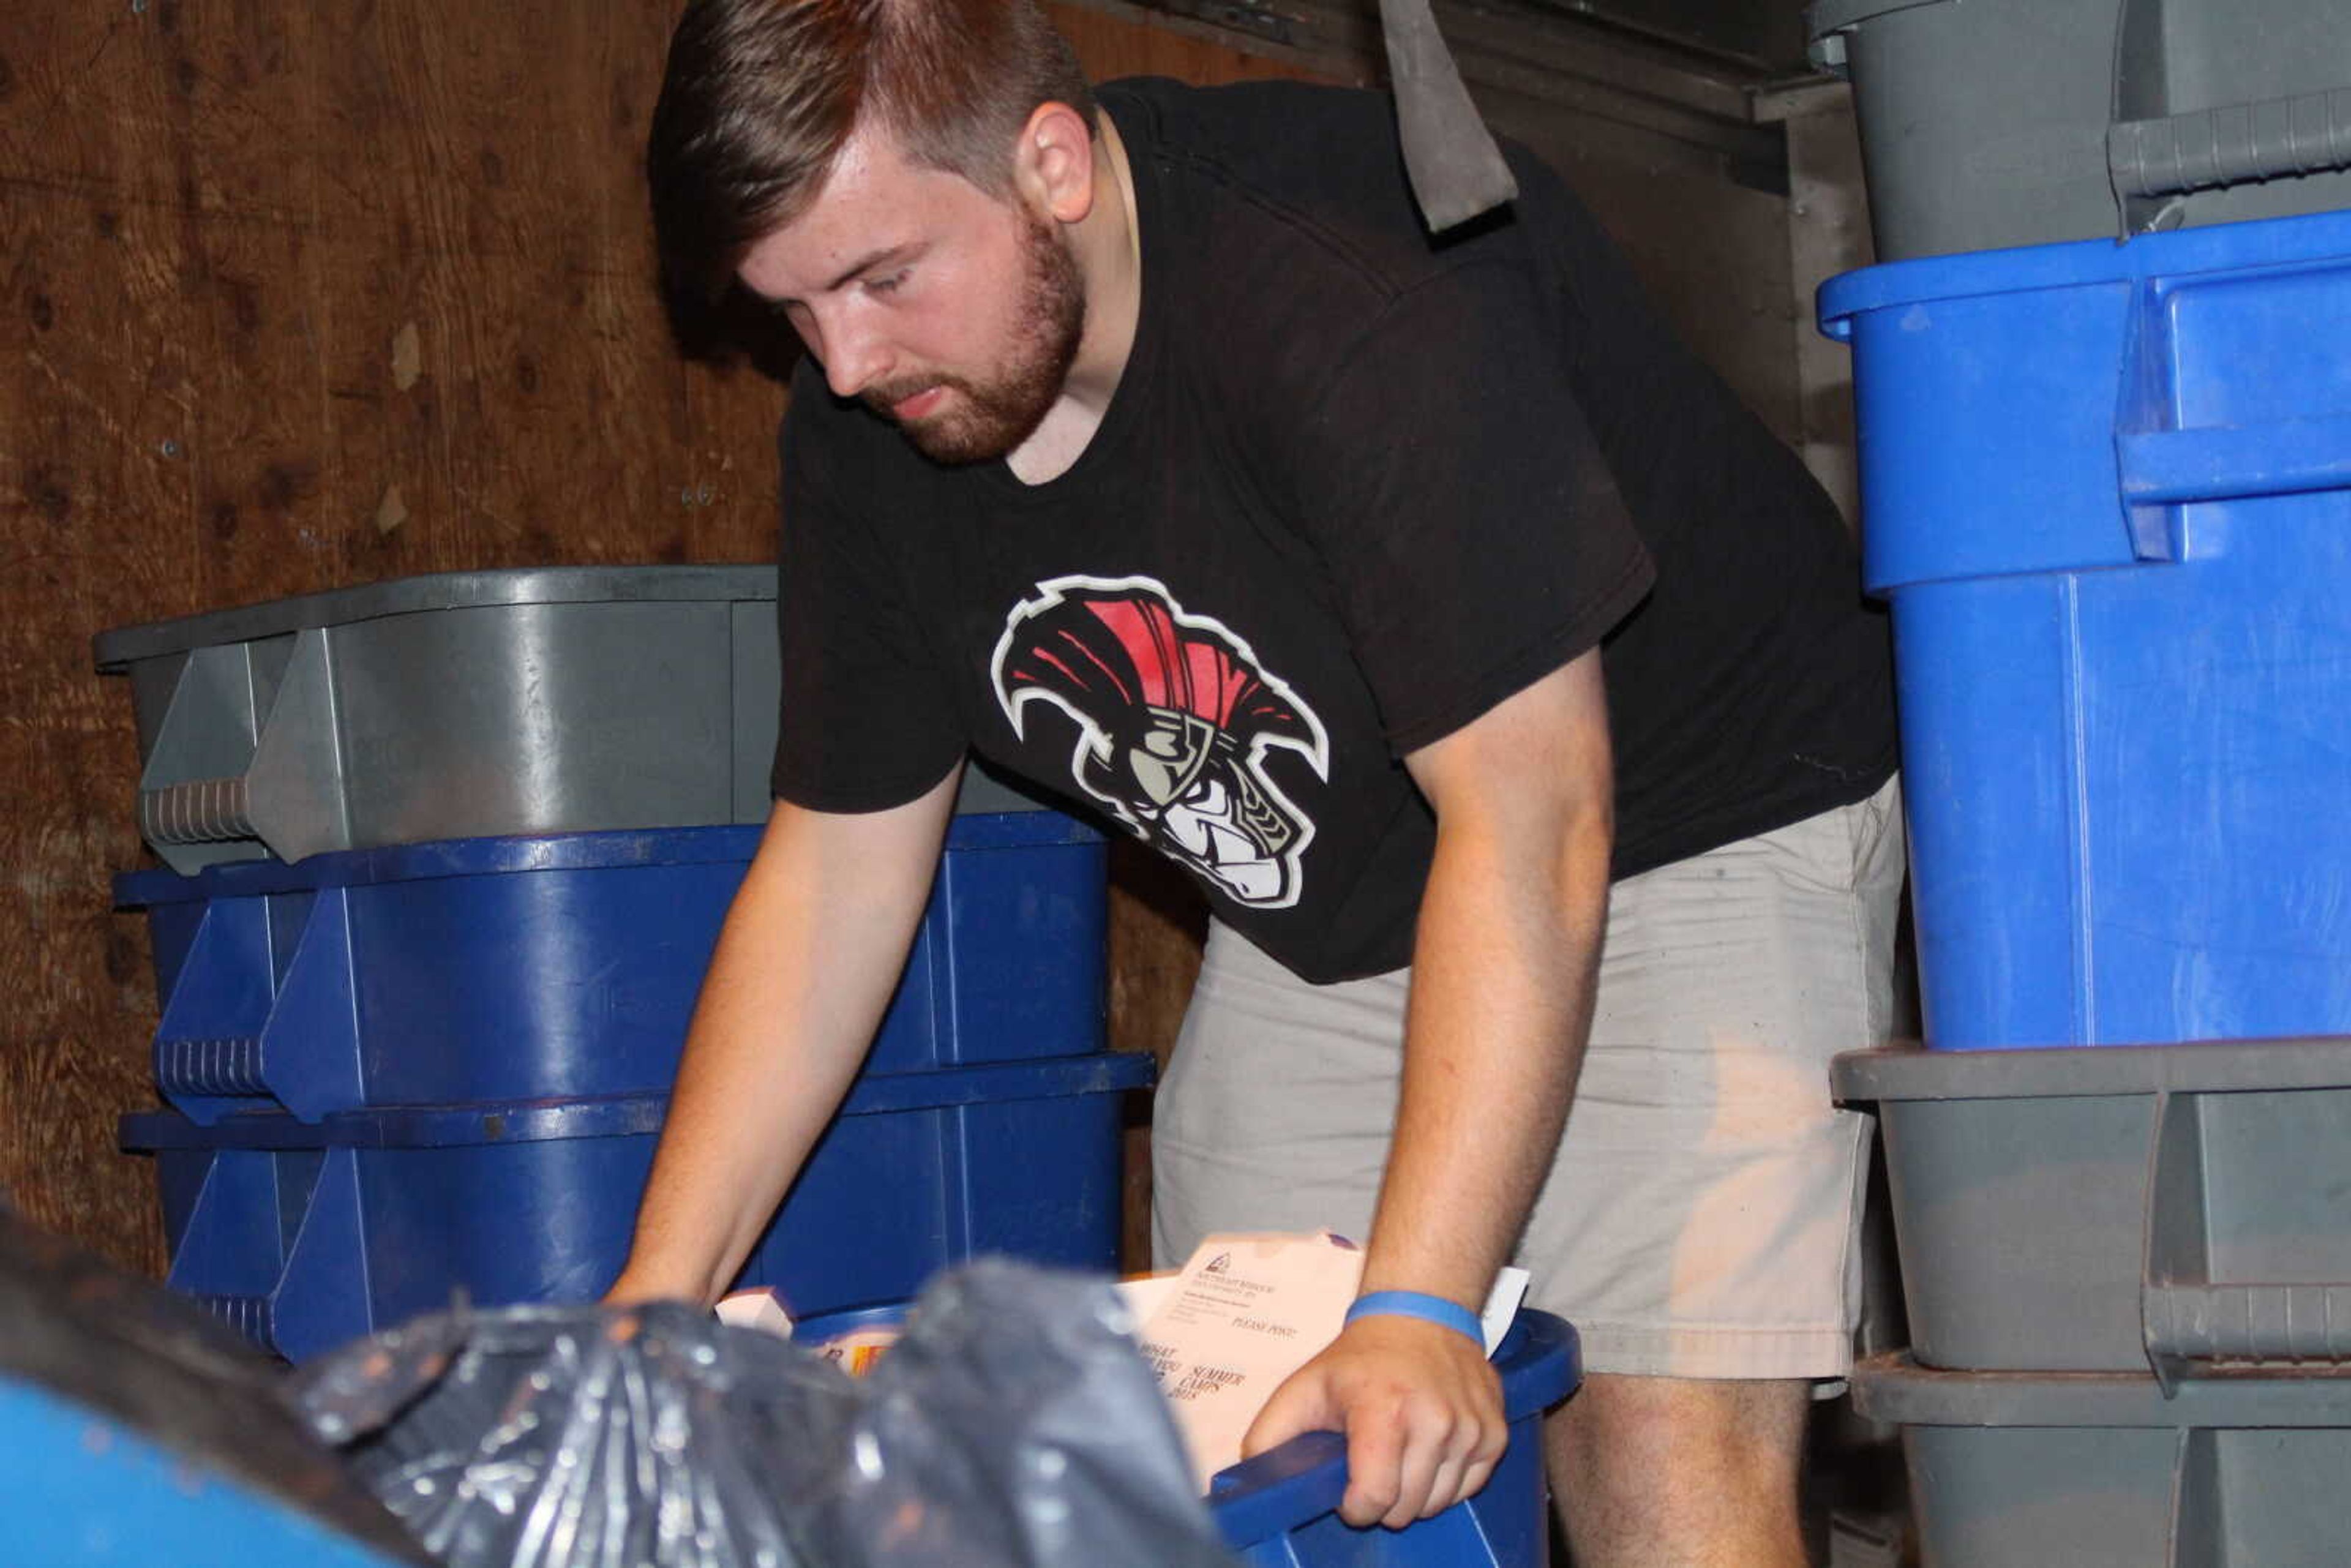 Senior James Grosch, who is employed by Facilities Management, loads up the box truck with recyclable materials Aug. 27.